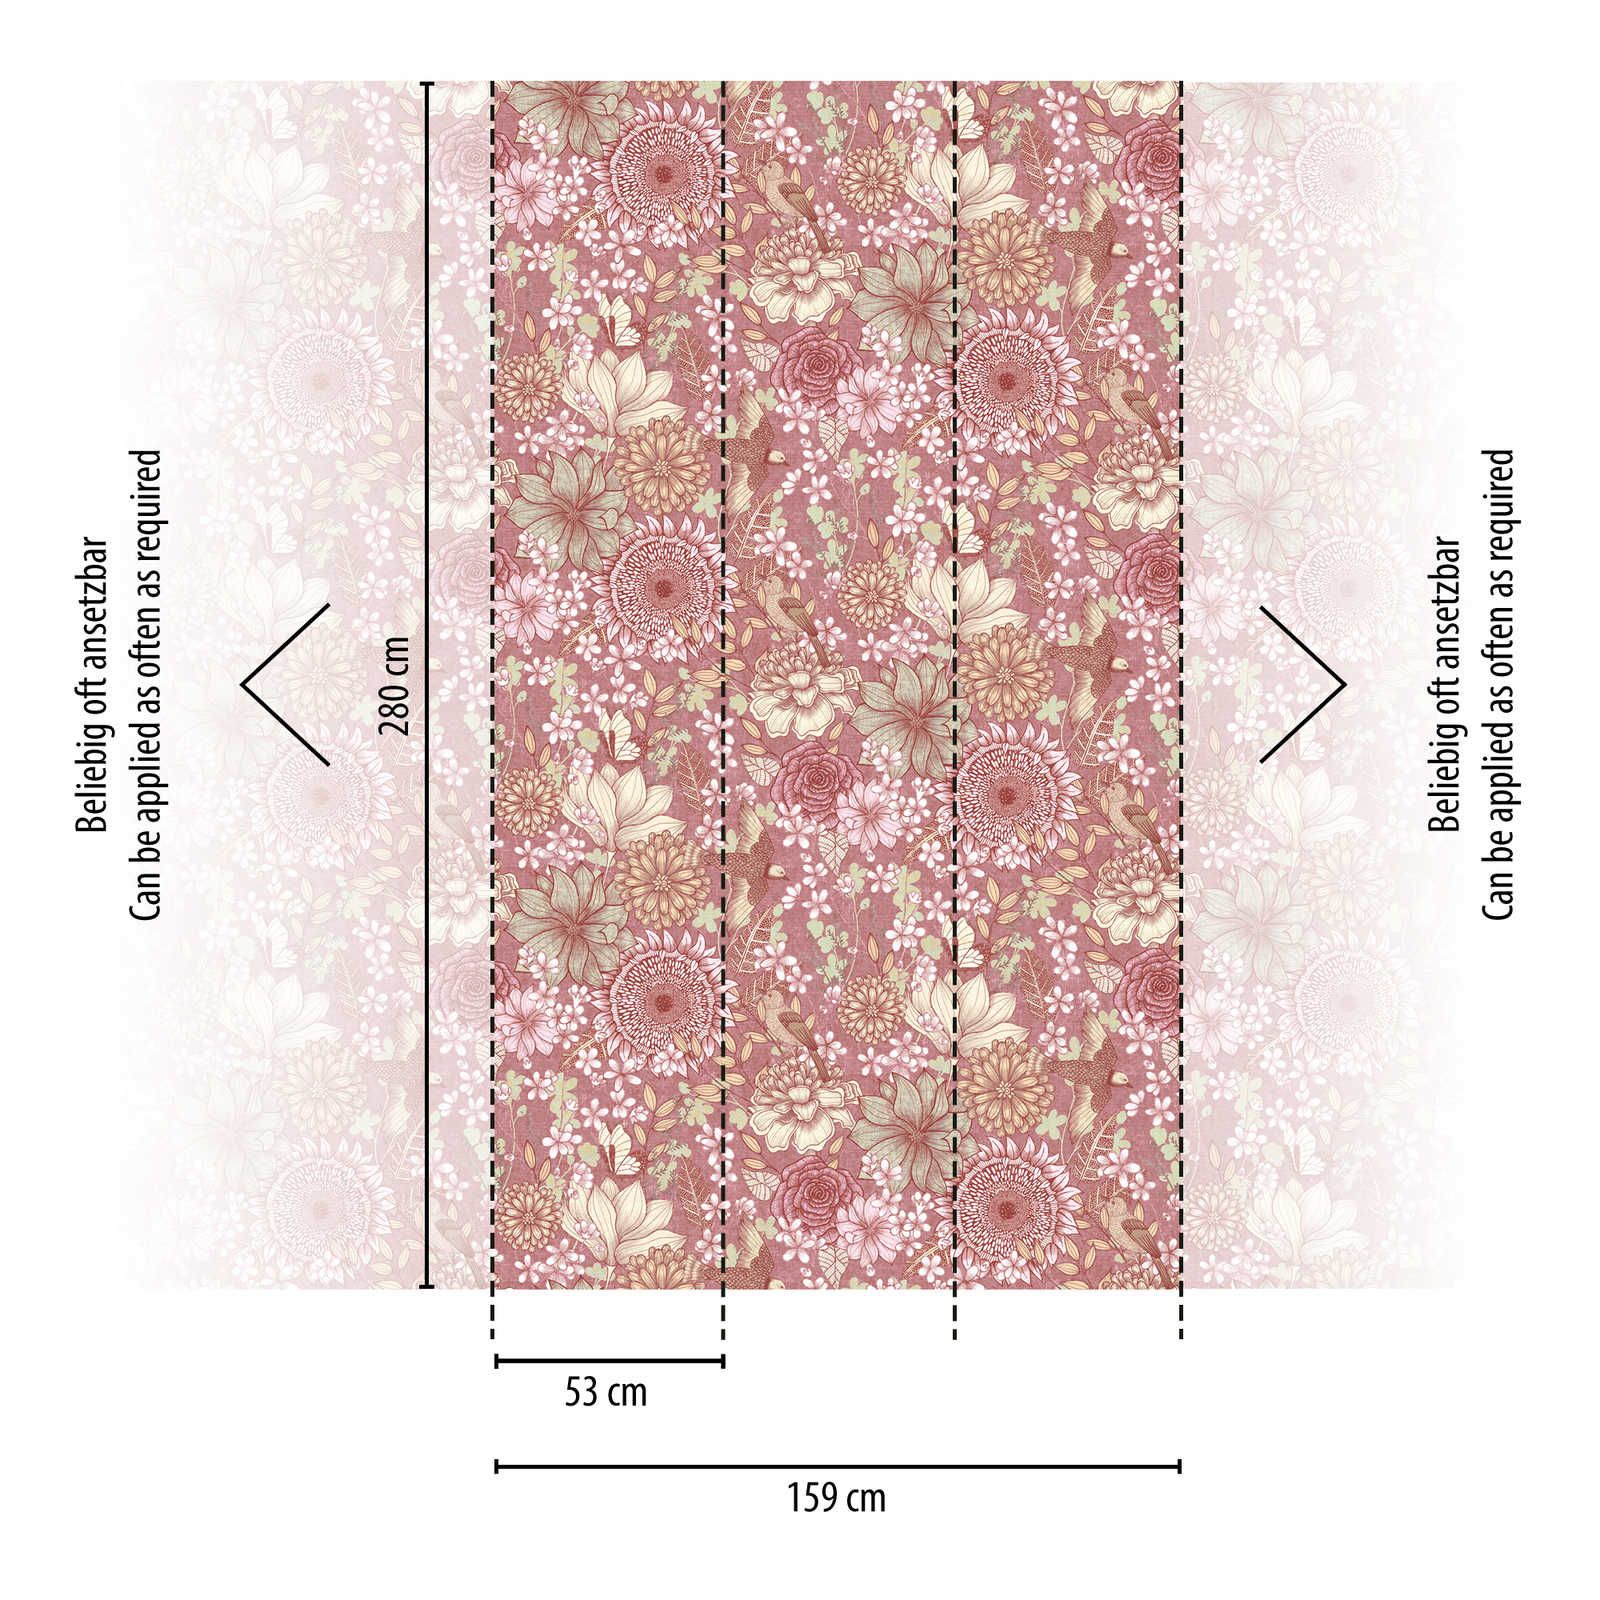             Floral non-woven wallpaper with various flowers and leaves - pink, white, cream
        